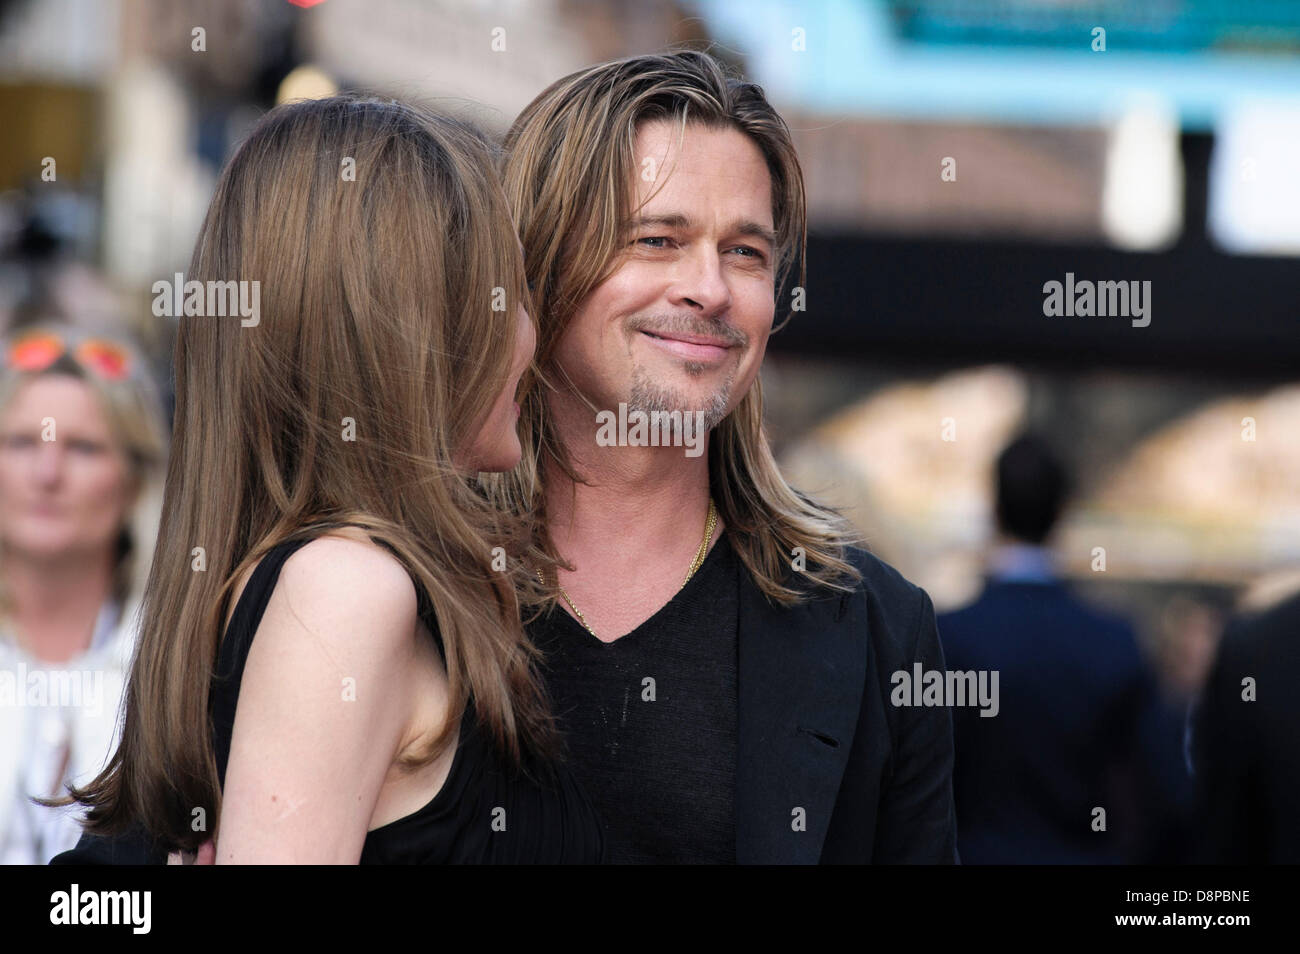 Angelina Jolie and Brad Pitt attends the World Premiere of World War Z on 02/06/2013 at Empire Leicester Square, London. Persons pictured: Angelina Jolie, Brad Pitt. Picture by Julie Edwards Stock Photo